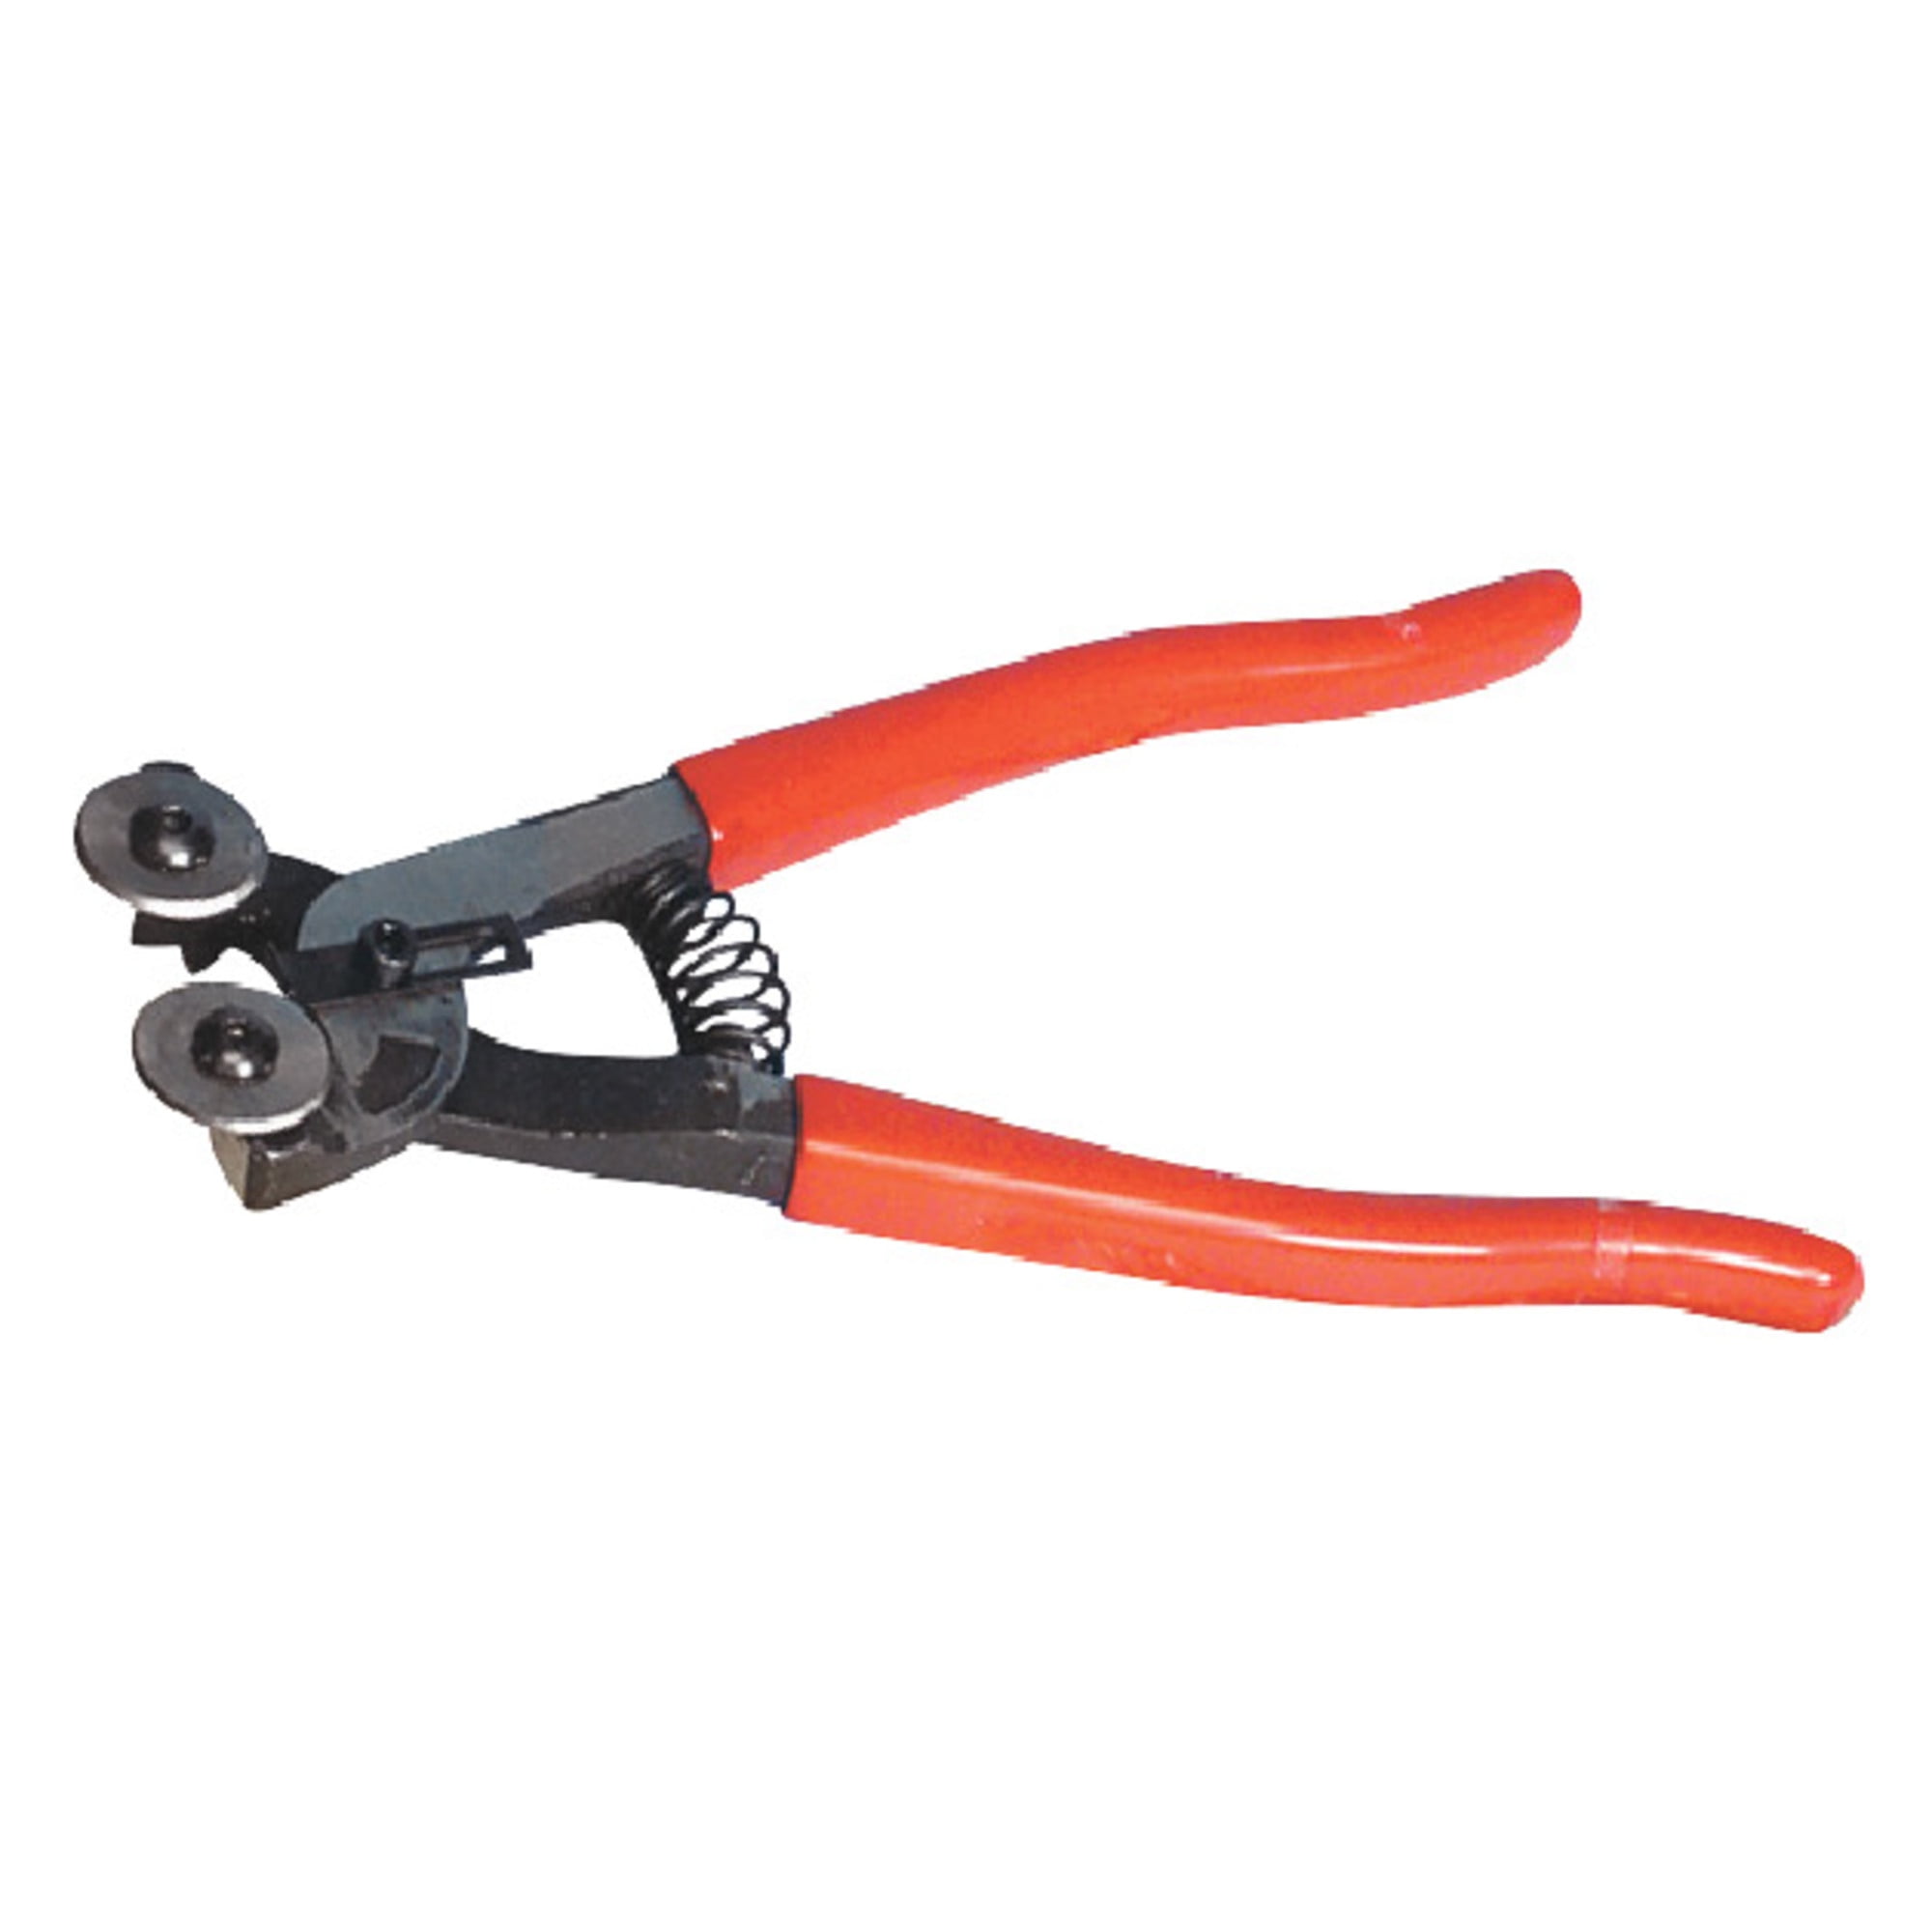 Dilwe 200mm Heavy-duty Glass Mosaic Cut Nippers Ceramic Tile Wheel Wheeled  Cutter Pliers Tool New, Mosaic Tools,Mosaic Cutter 